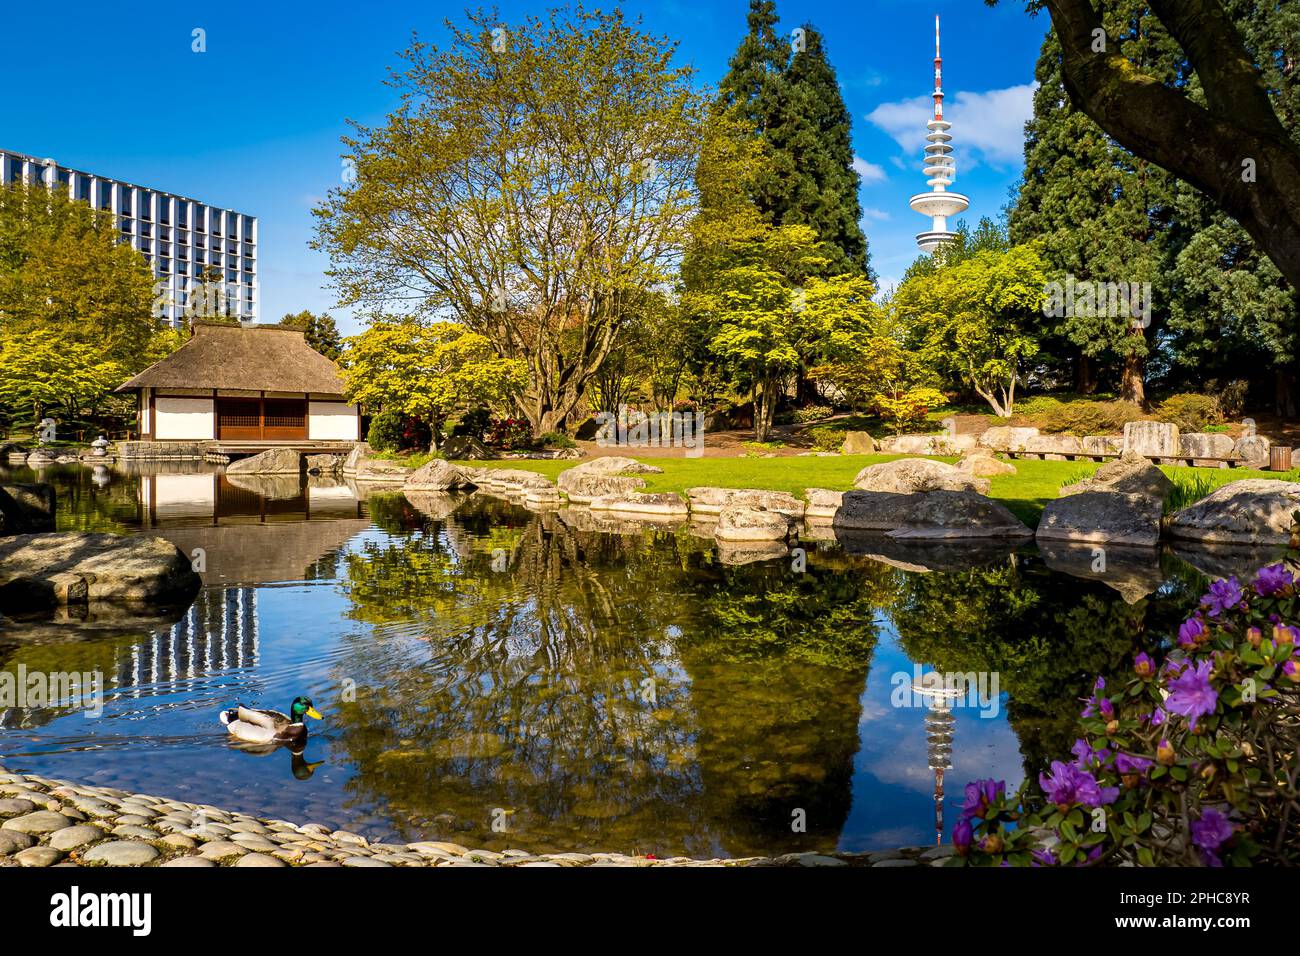 A male mallard duck glides across a pond in the Japanese garden of Planten un Blomen, with the Japanese tea house and towering Heinrich Hertz Tower. Stock Photo